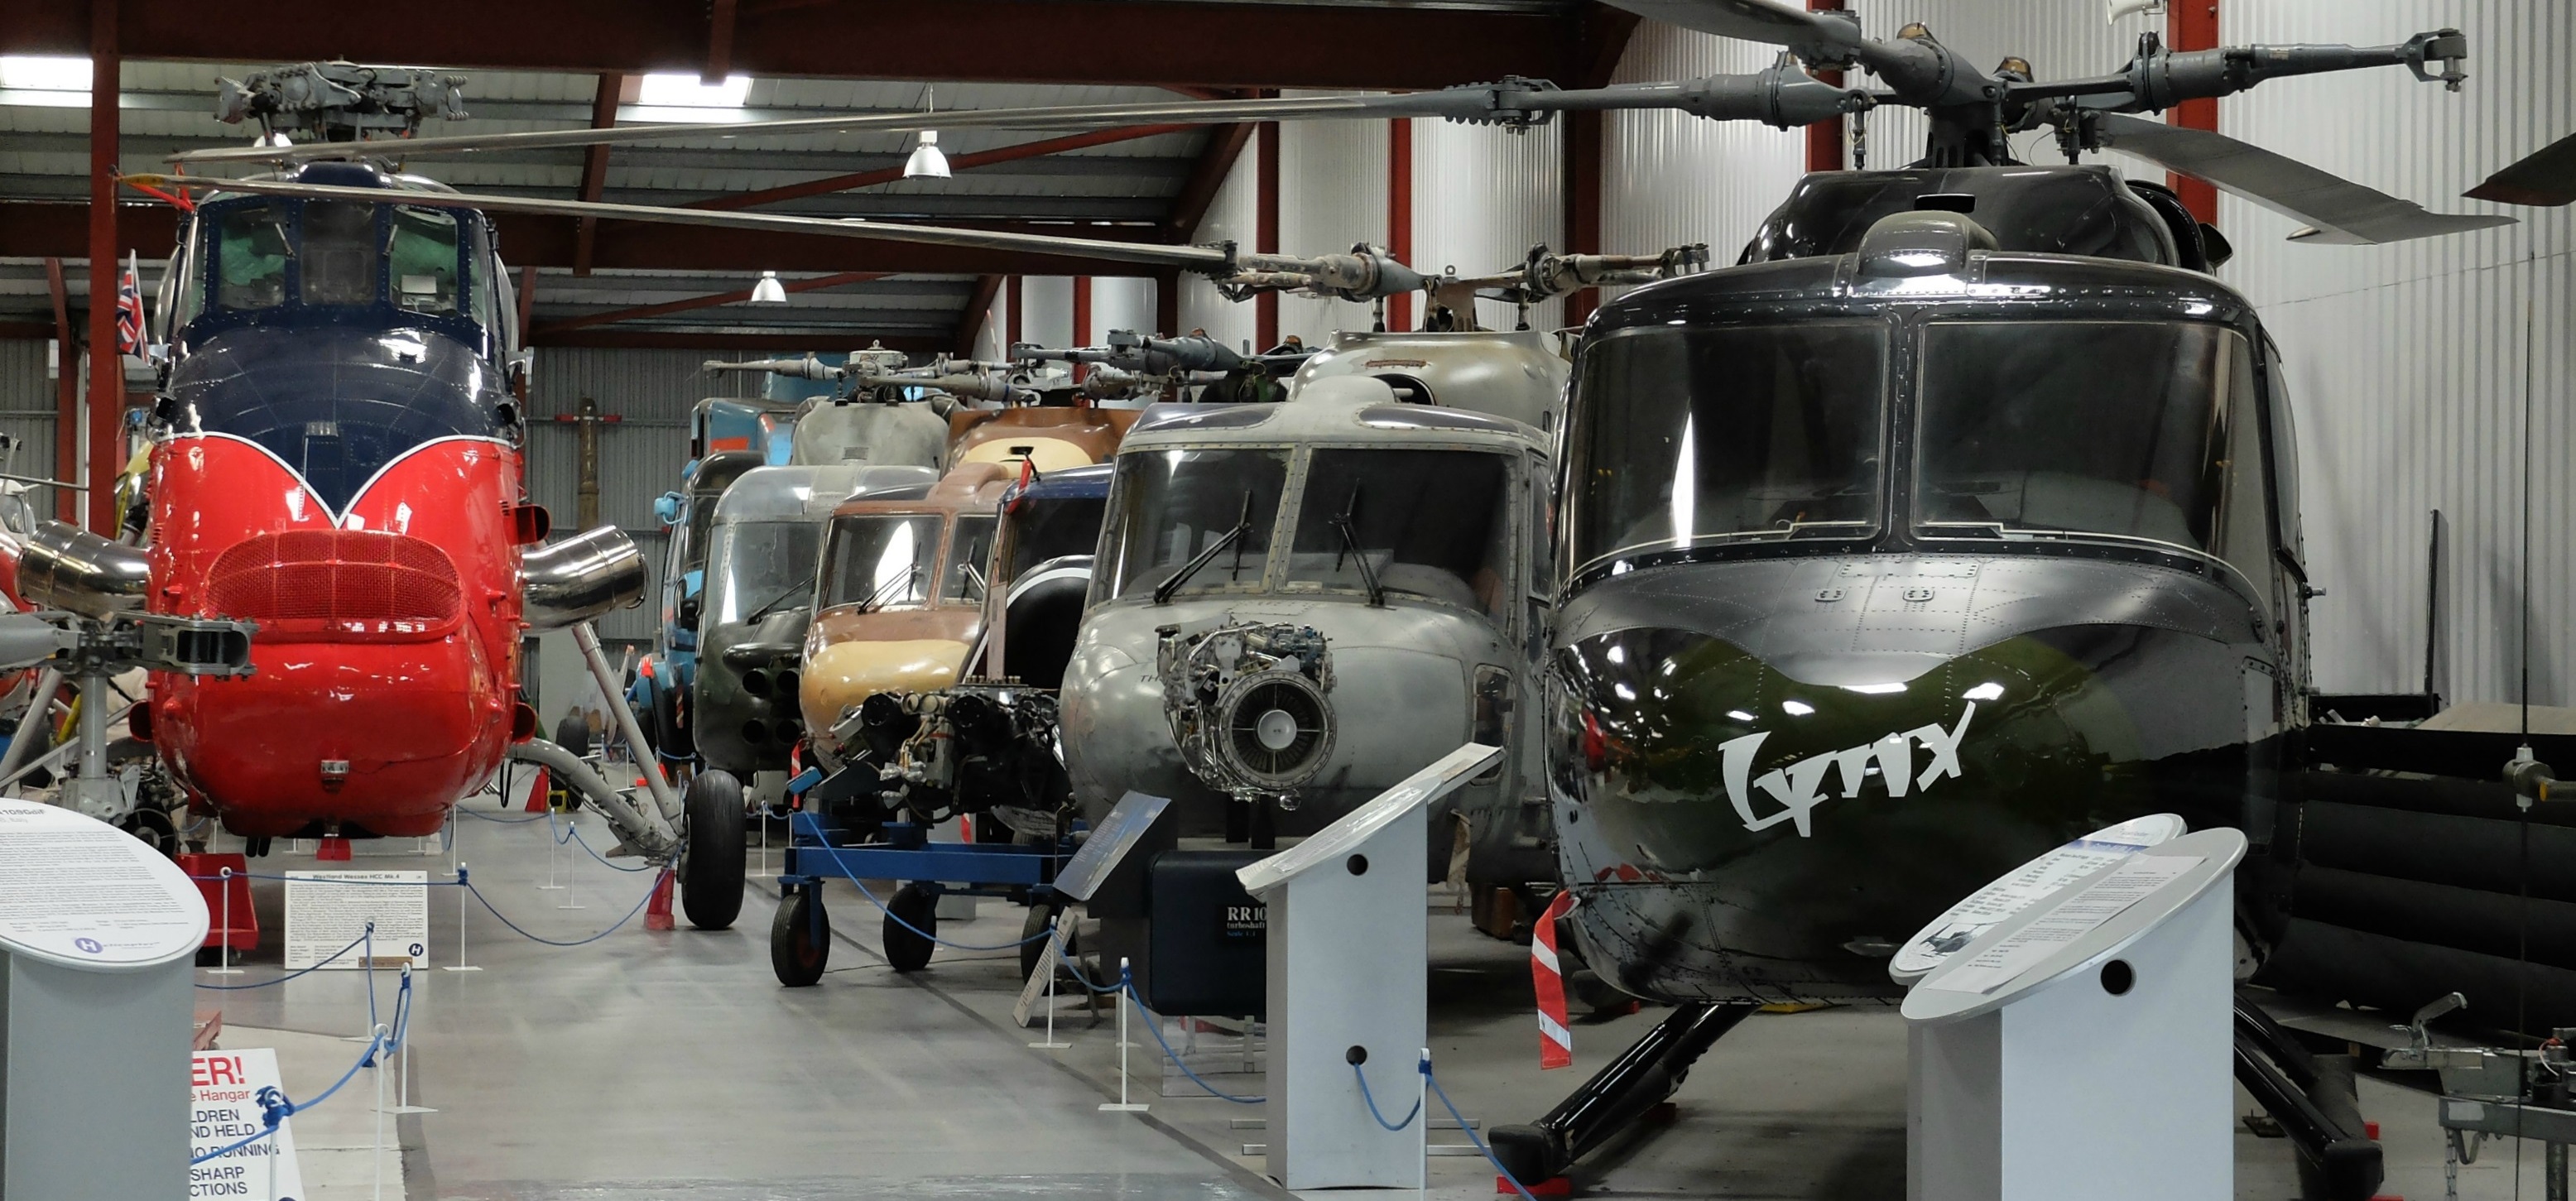 Helicopter Museum